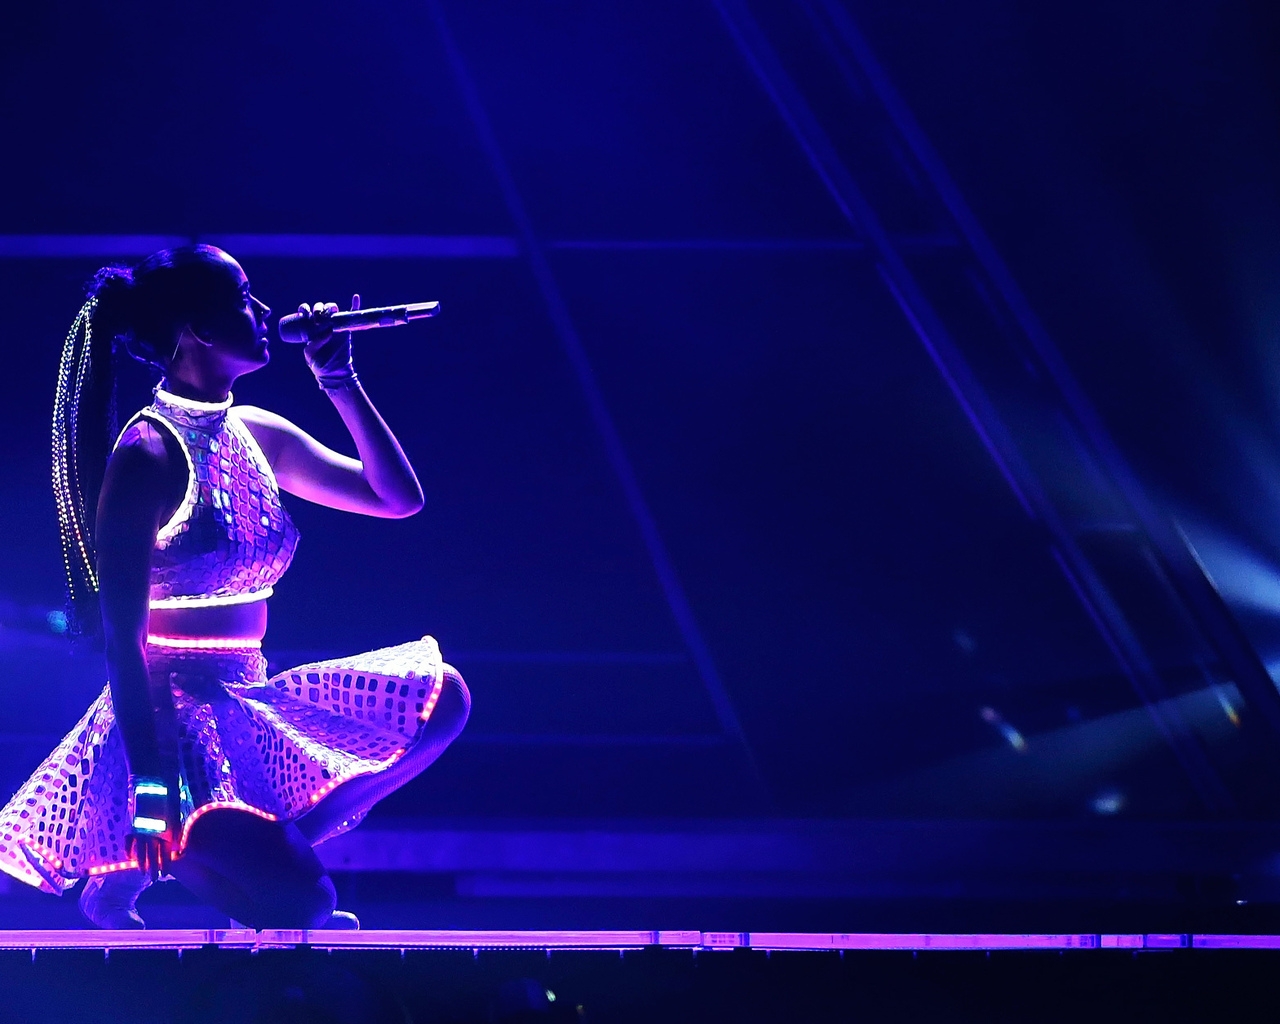 Katy Perry Live Concert for 1280 x 1024 resolution